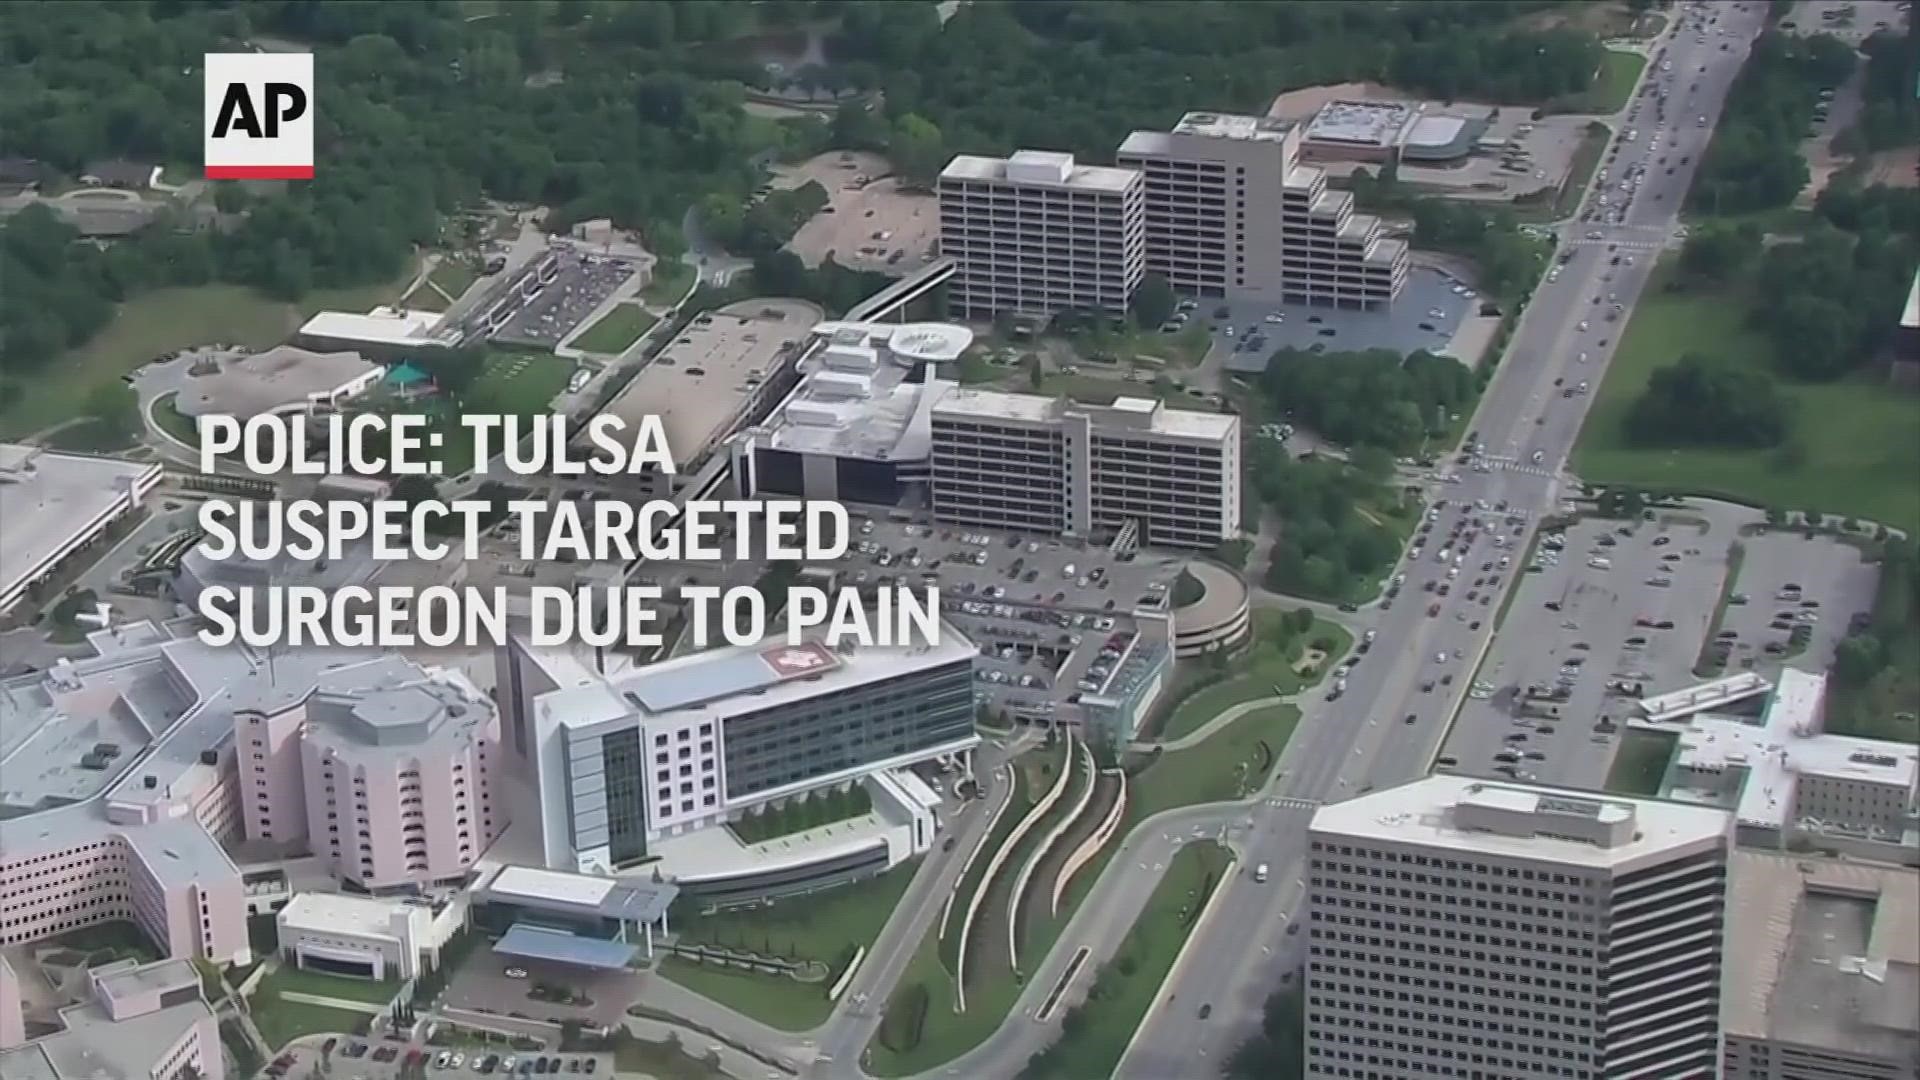 A man who blamed his surgeon for pain after a recent back operation bought an AR-style rifle and opened fire at a Tulsa medical office, police said Thursday.